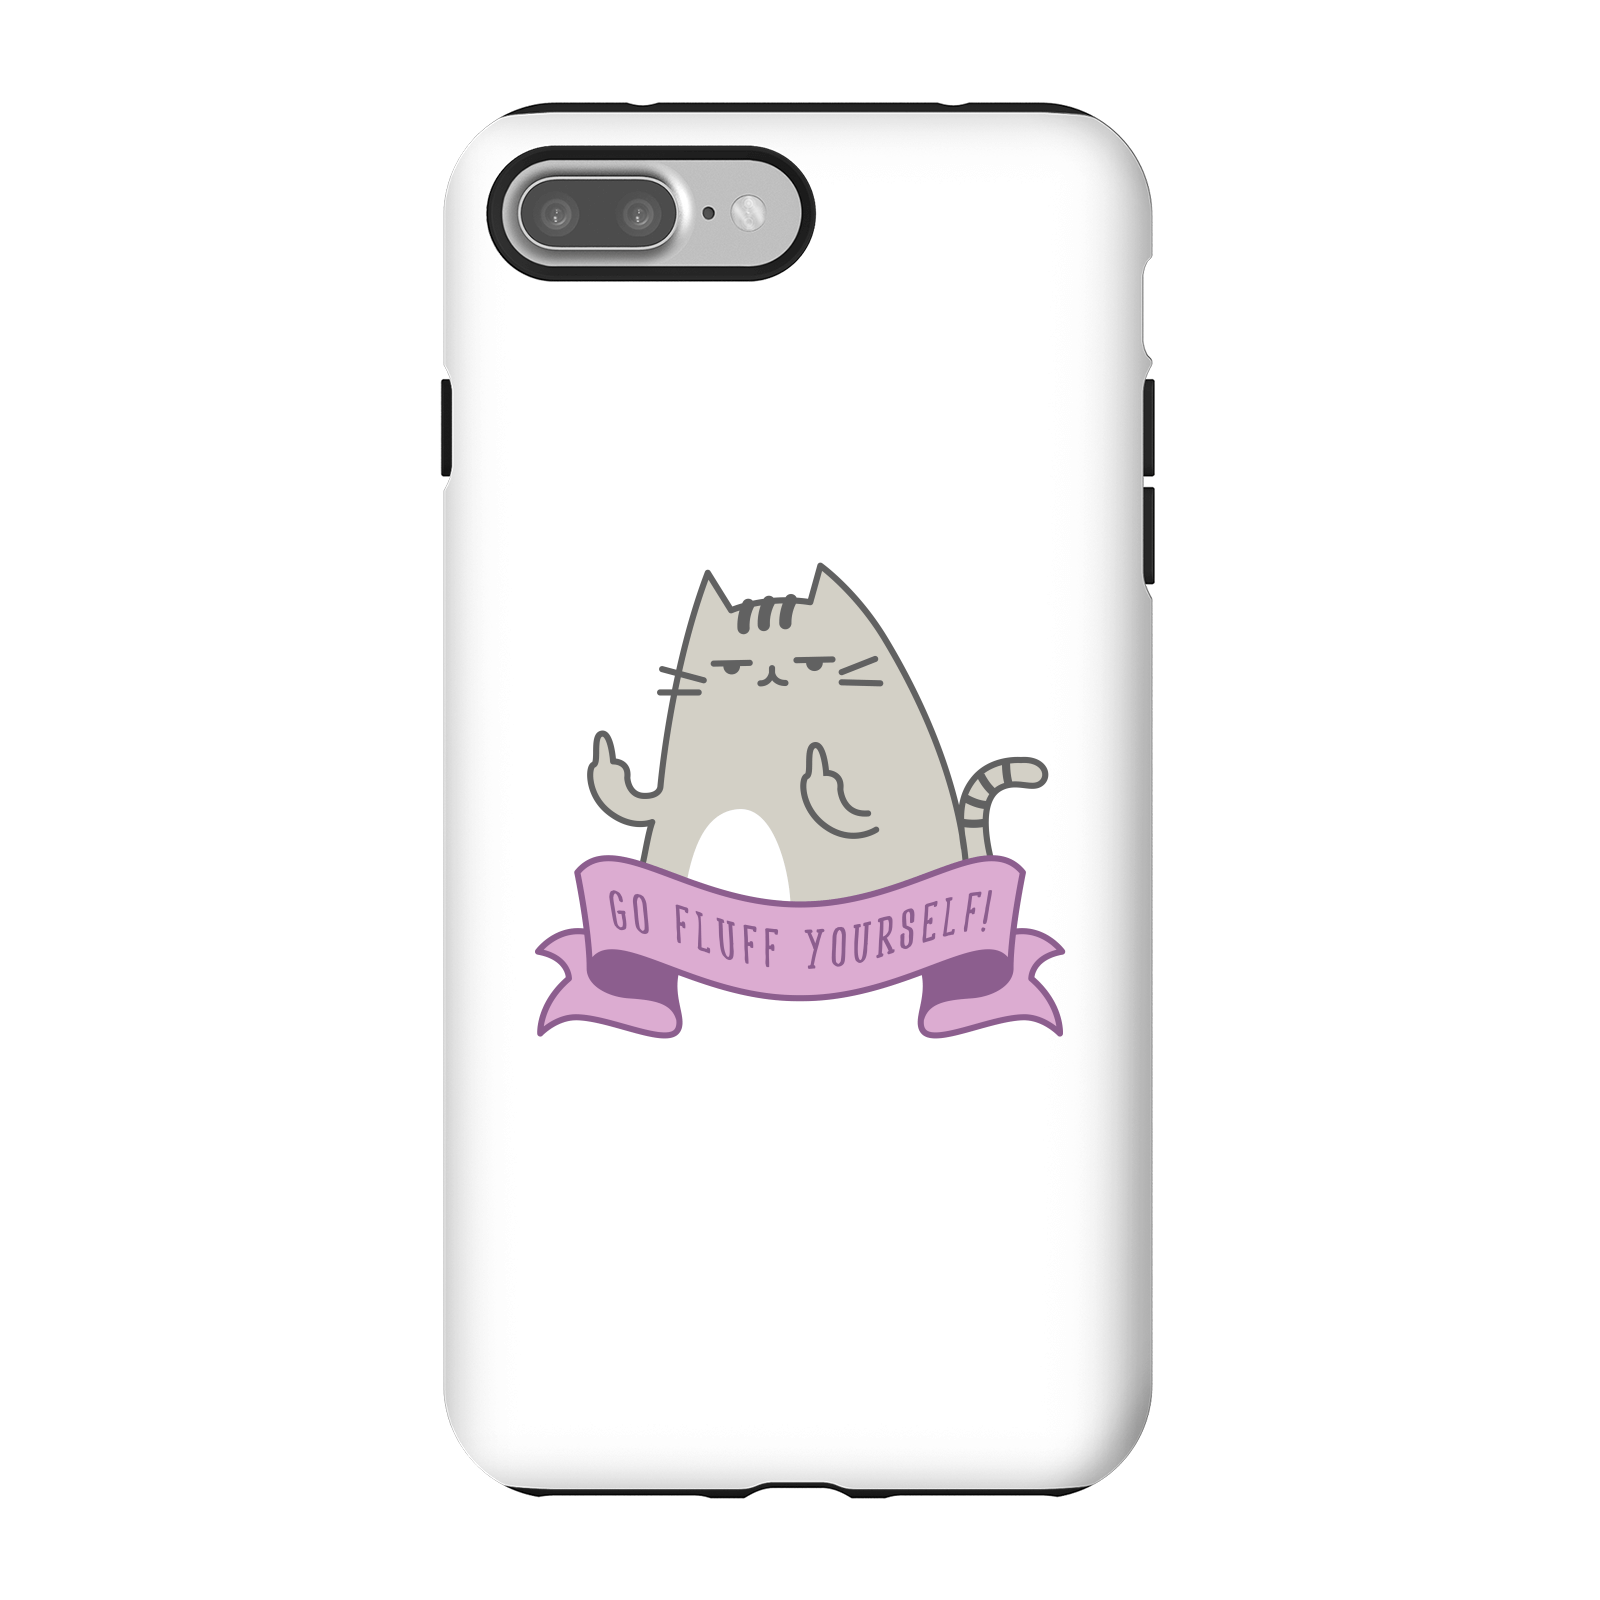 Go Fluff Yourself! Phone Case for iPhone and Android - iPhone 7 Plus - Tough Case - Matte